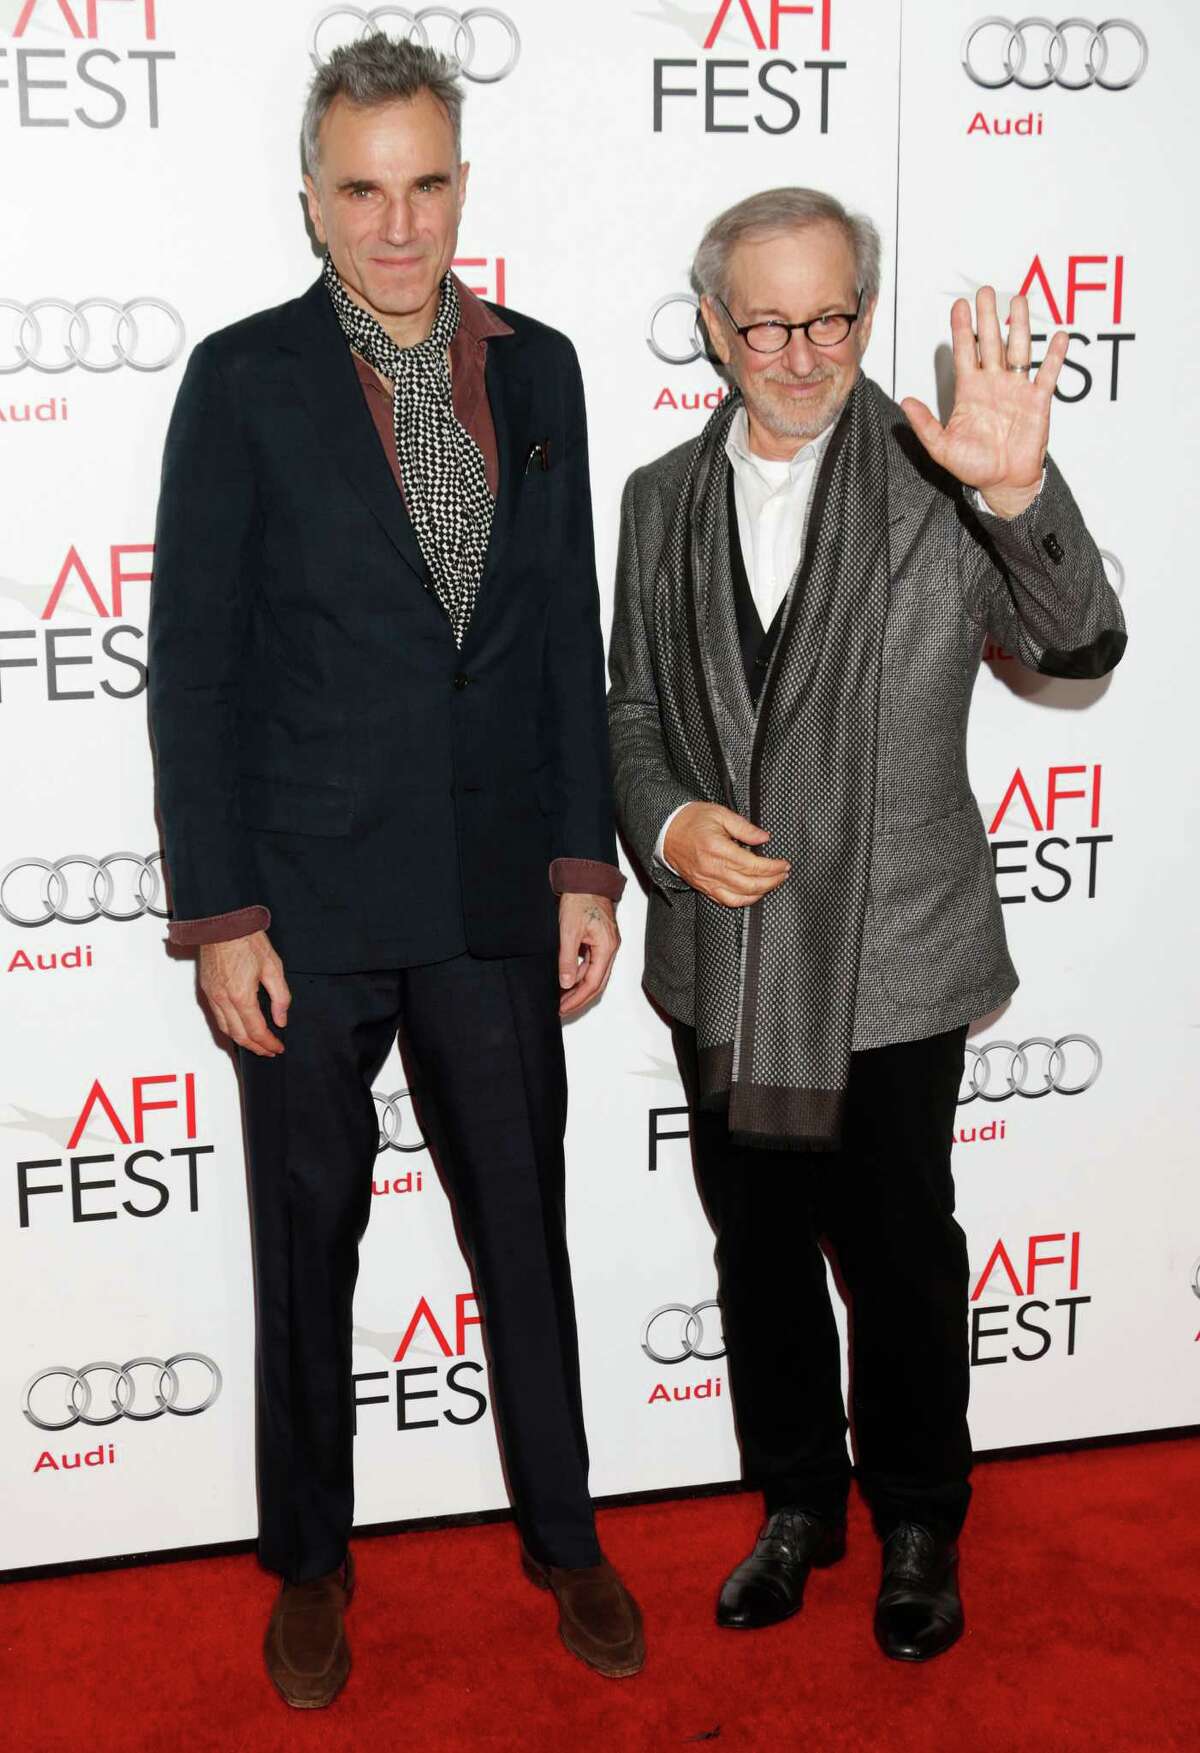 Daniel Day-Lewis and director Steven Spielberg arrive at the "Lincoln" premiere at AFI Fest at Grauman's Chinese Theatre on Thursday November 8, 2012 in Hollywood, California. (Photo by Todd Williamson/Invision/AP Images)